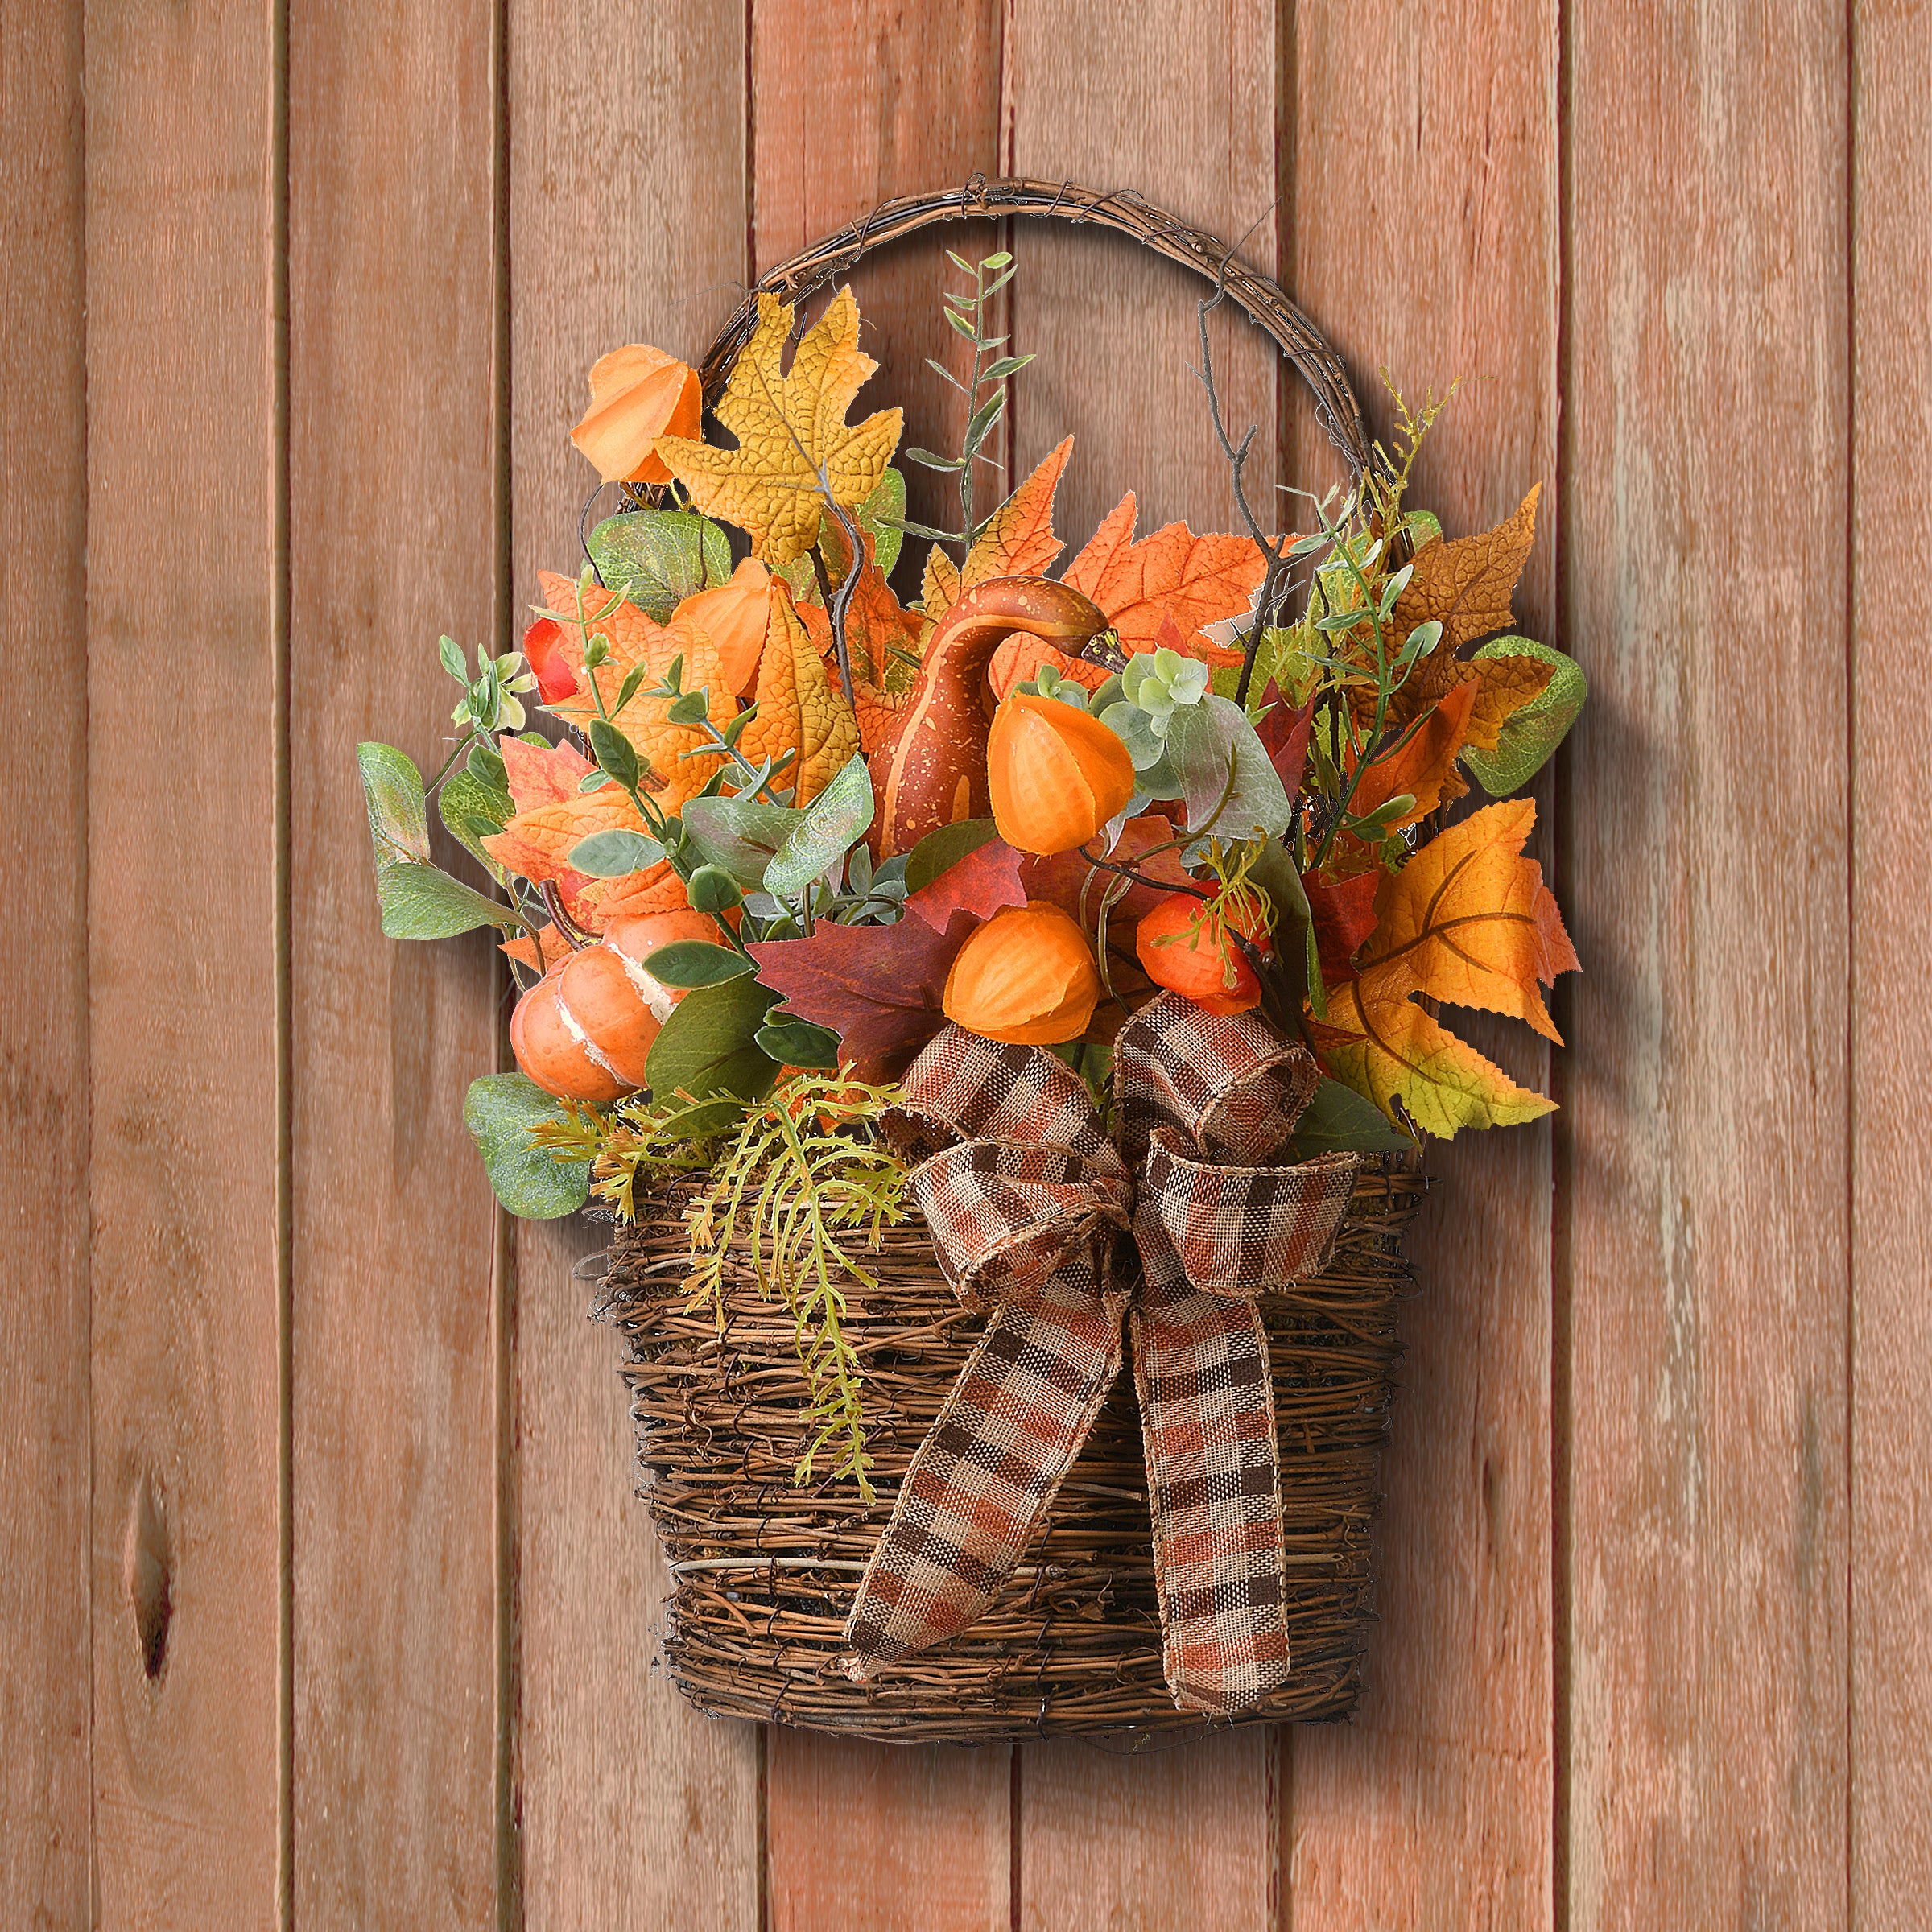 National Tree Company Artificial Flowers in Wicker Basket, Decorated with Pumpkins, Gourds, Flower Buds, Burlap Bows, Maple Leaves, Autumn Collection, 17 in